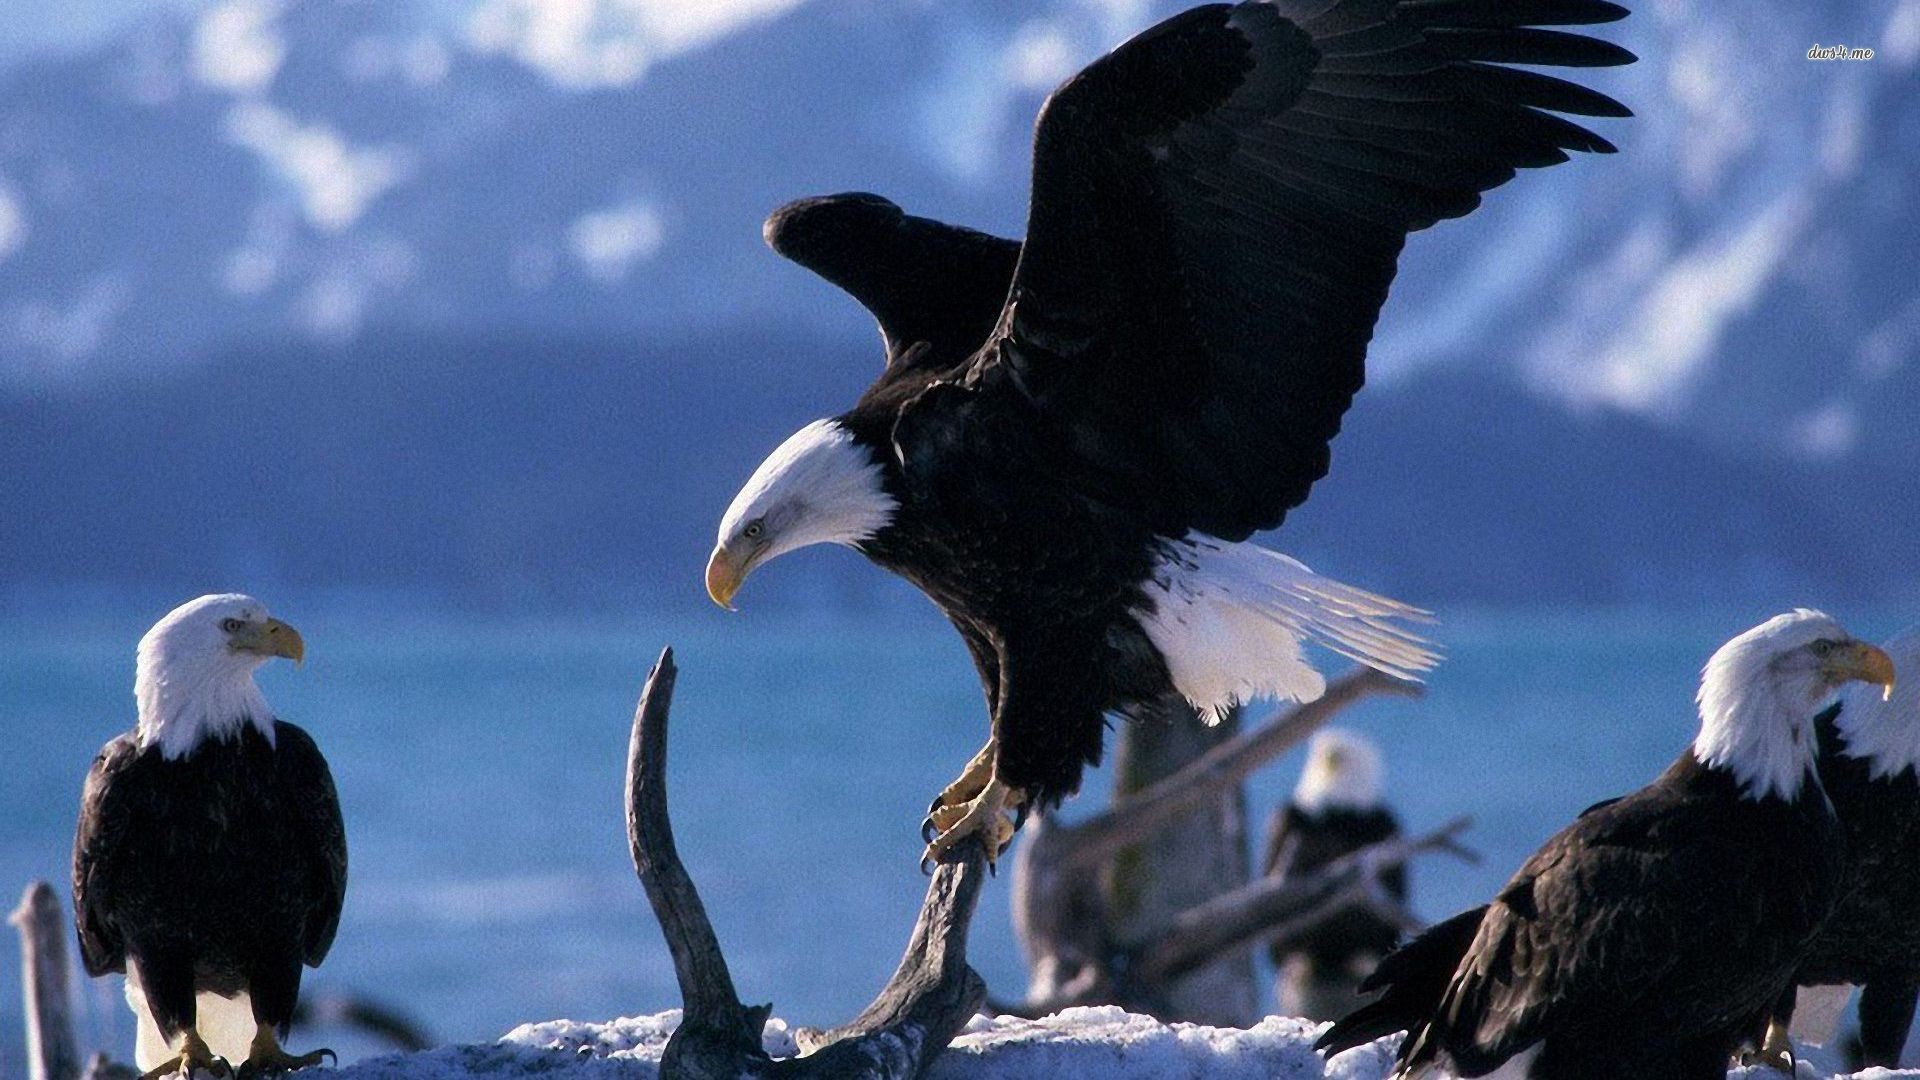 Flying Eagle HD Wallpapers, Flying Eagle Pictures, New Wallpapers |  Download Wallpaper | Pinterest | Eagle pictures, Hd wallpaper and Wallpaper